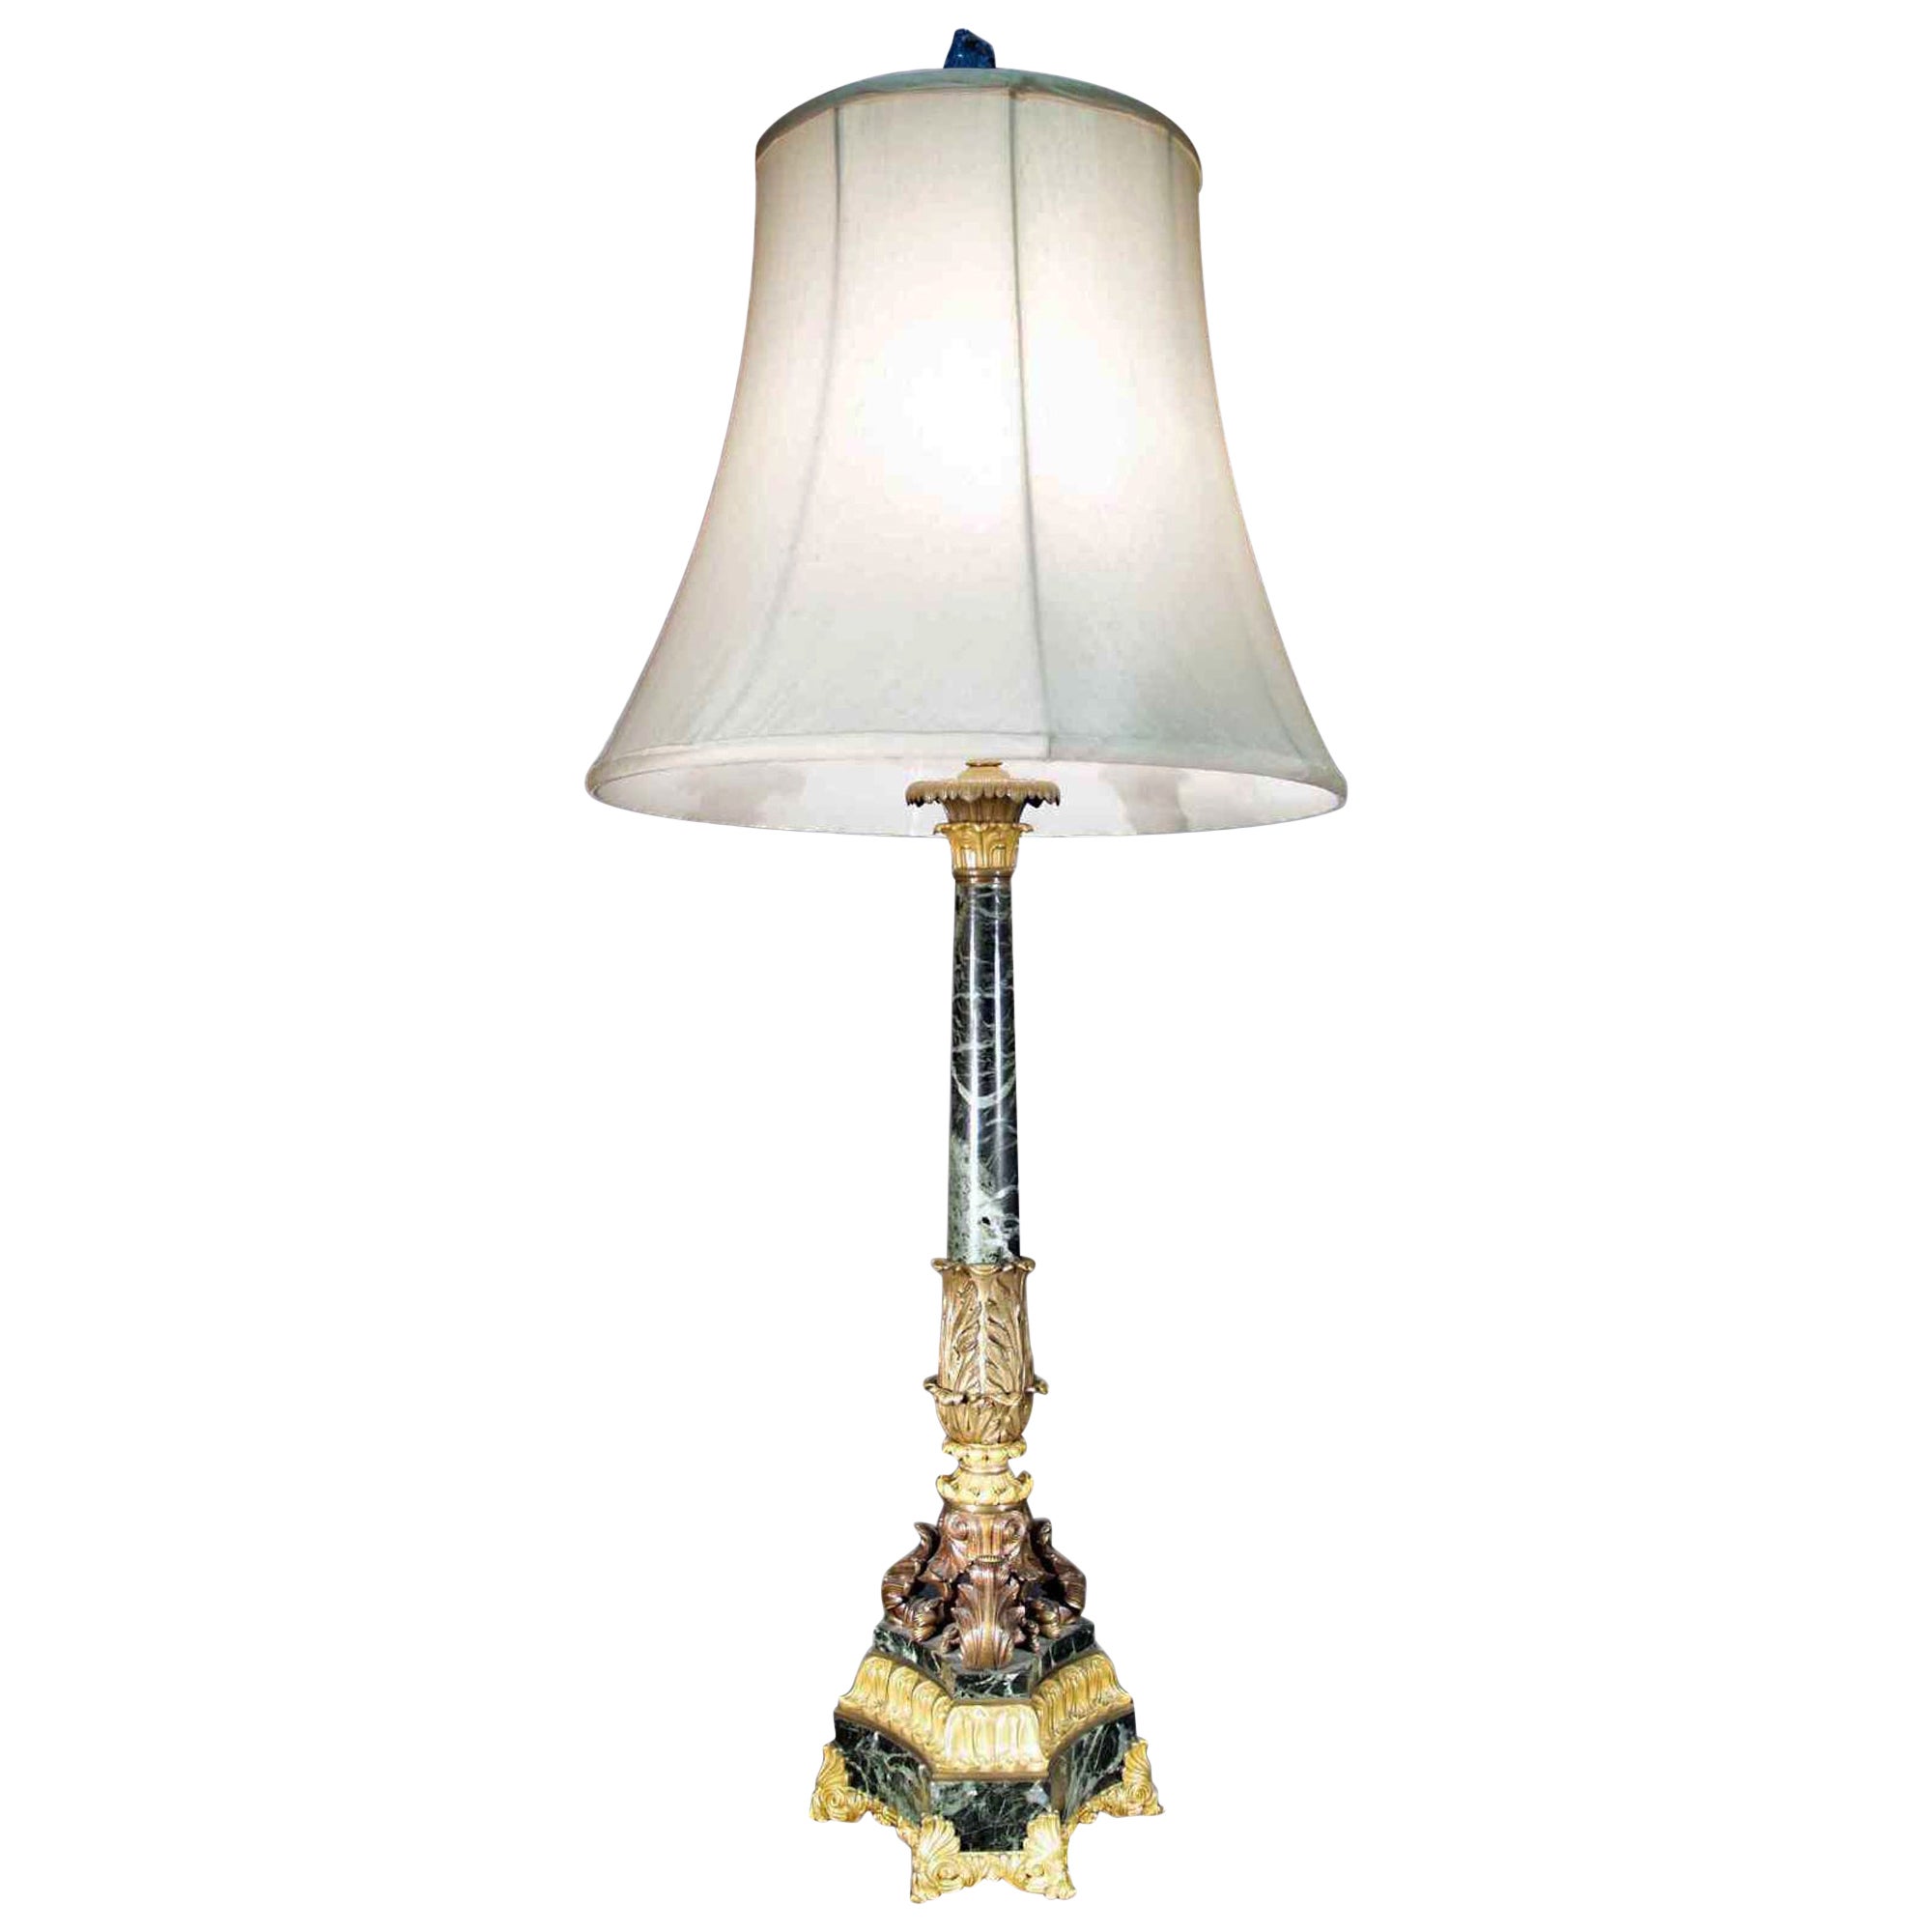 French 19th Century Neo-Classical Verde Antico Marble Lamp